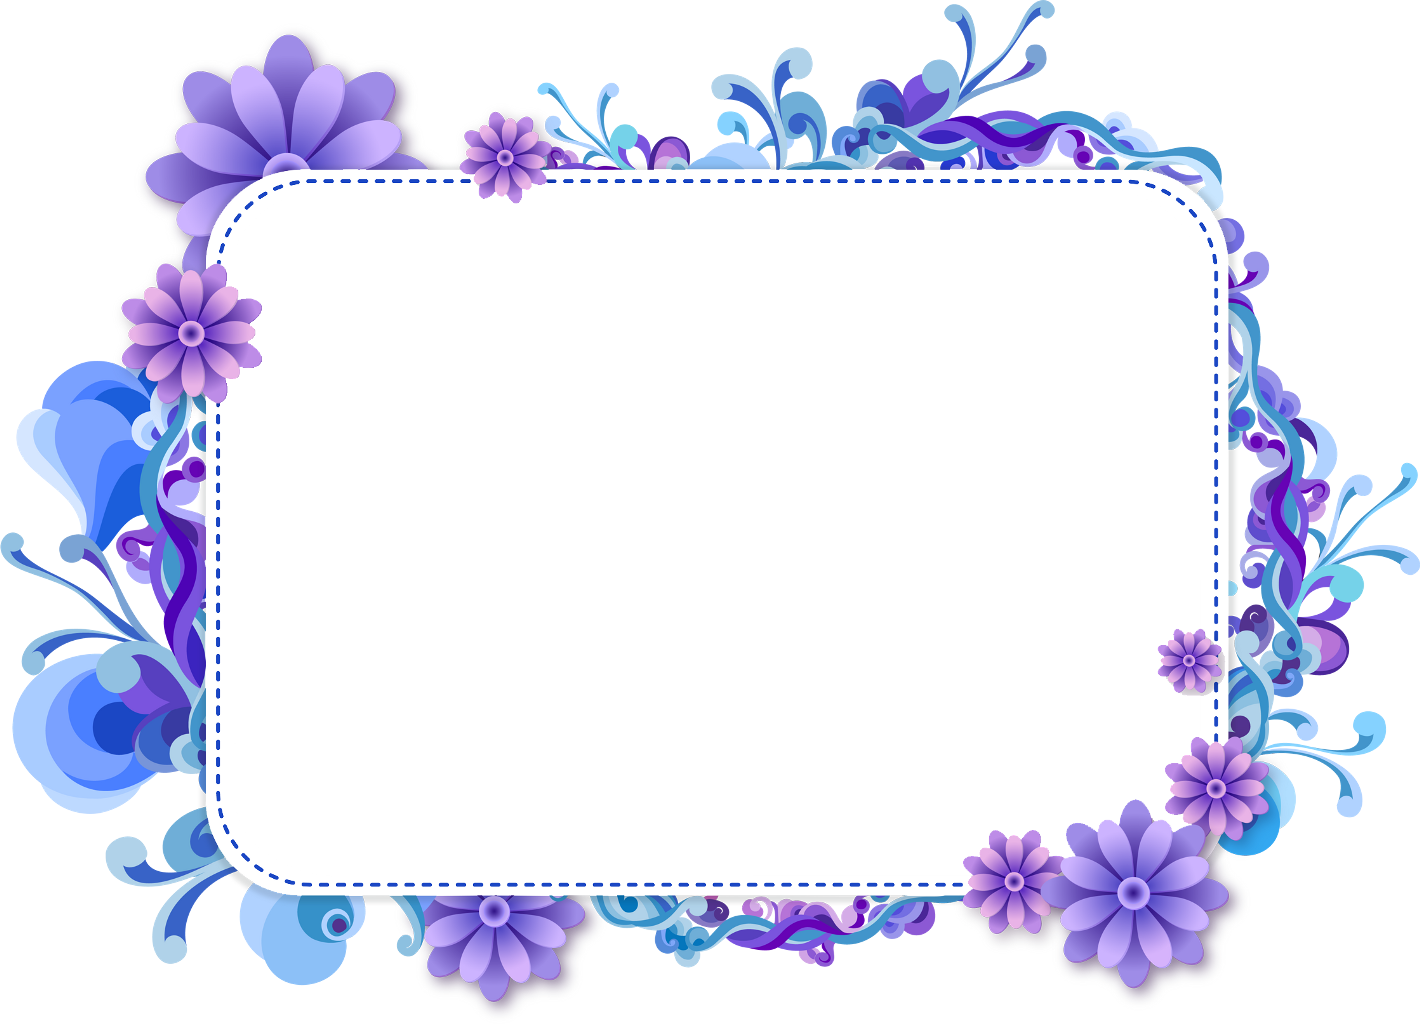 Girly clipart frame, Girly frame Transparent FREE for download on